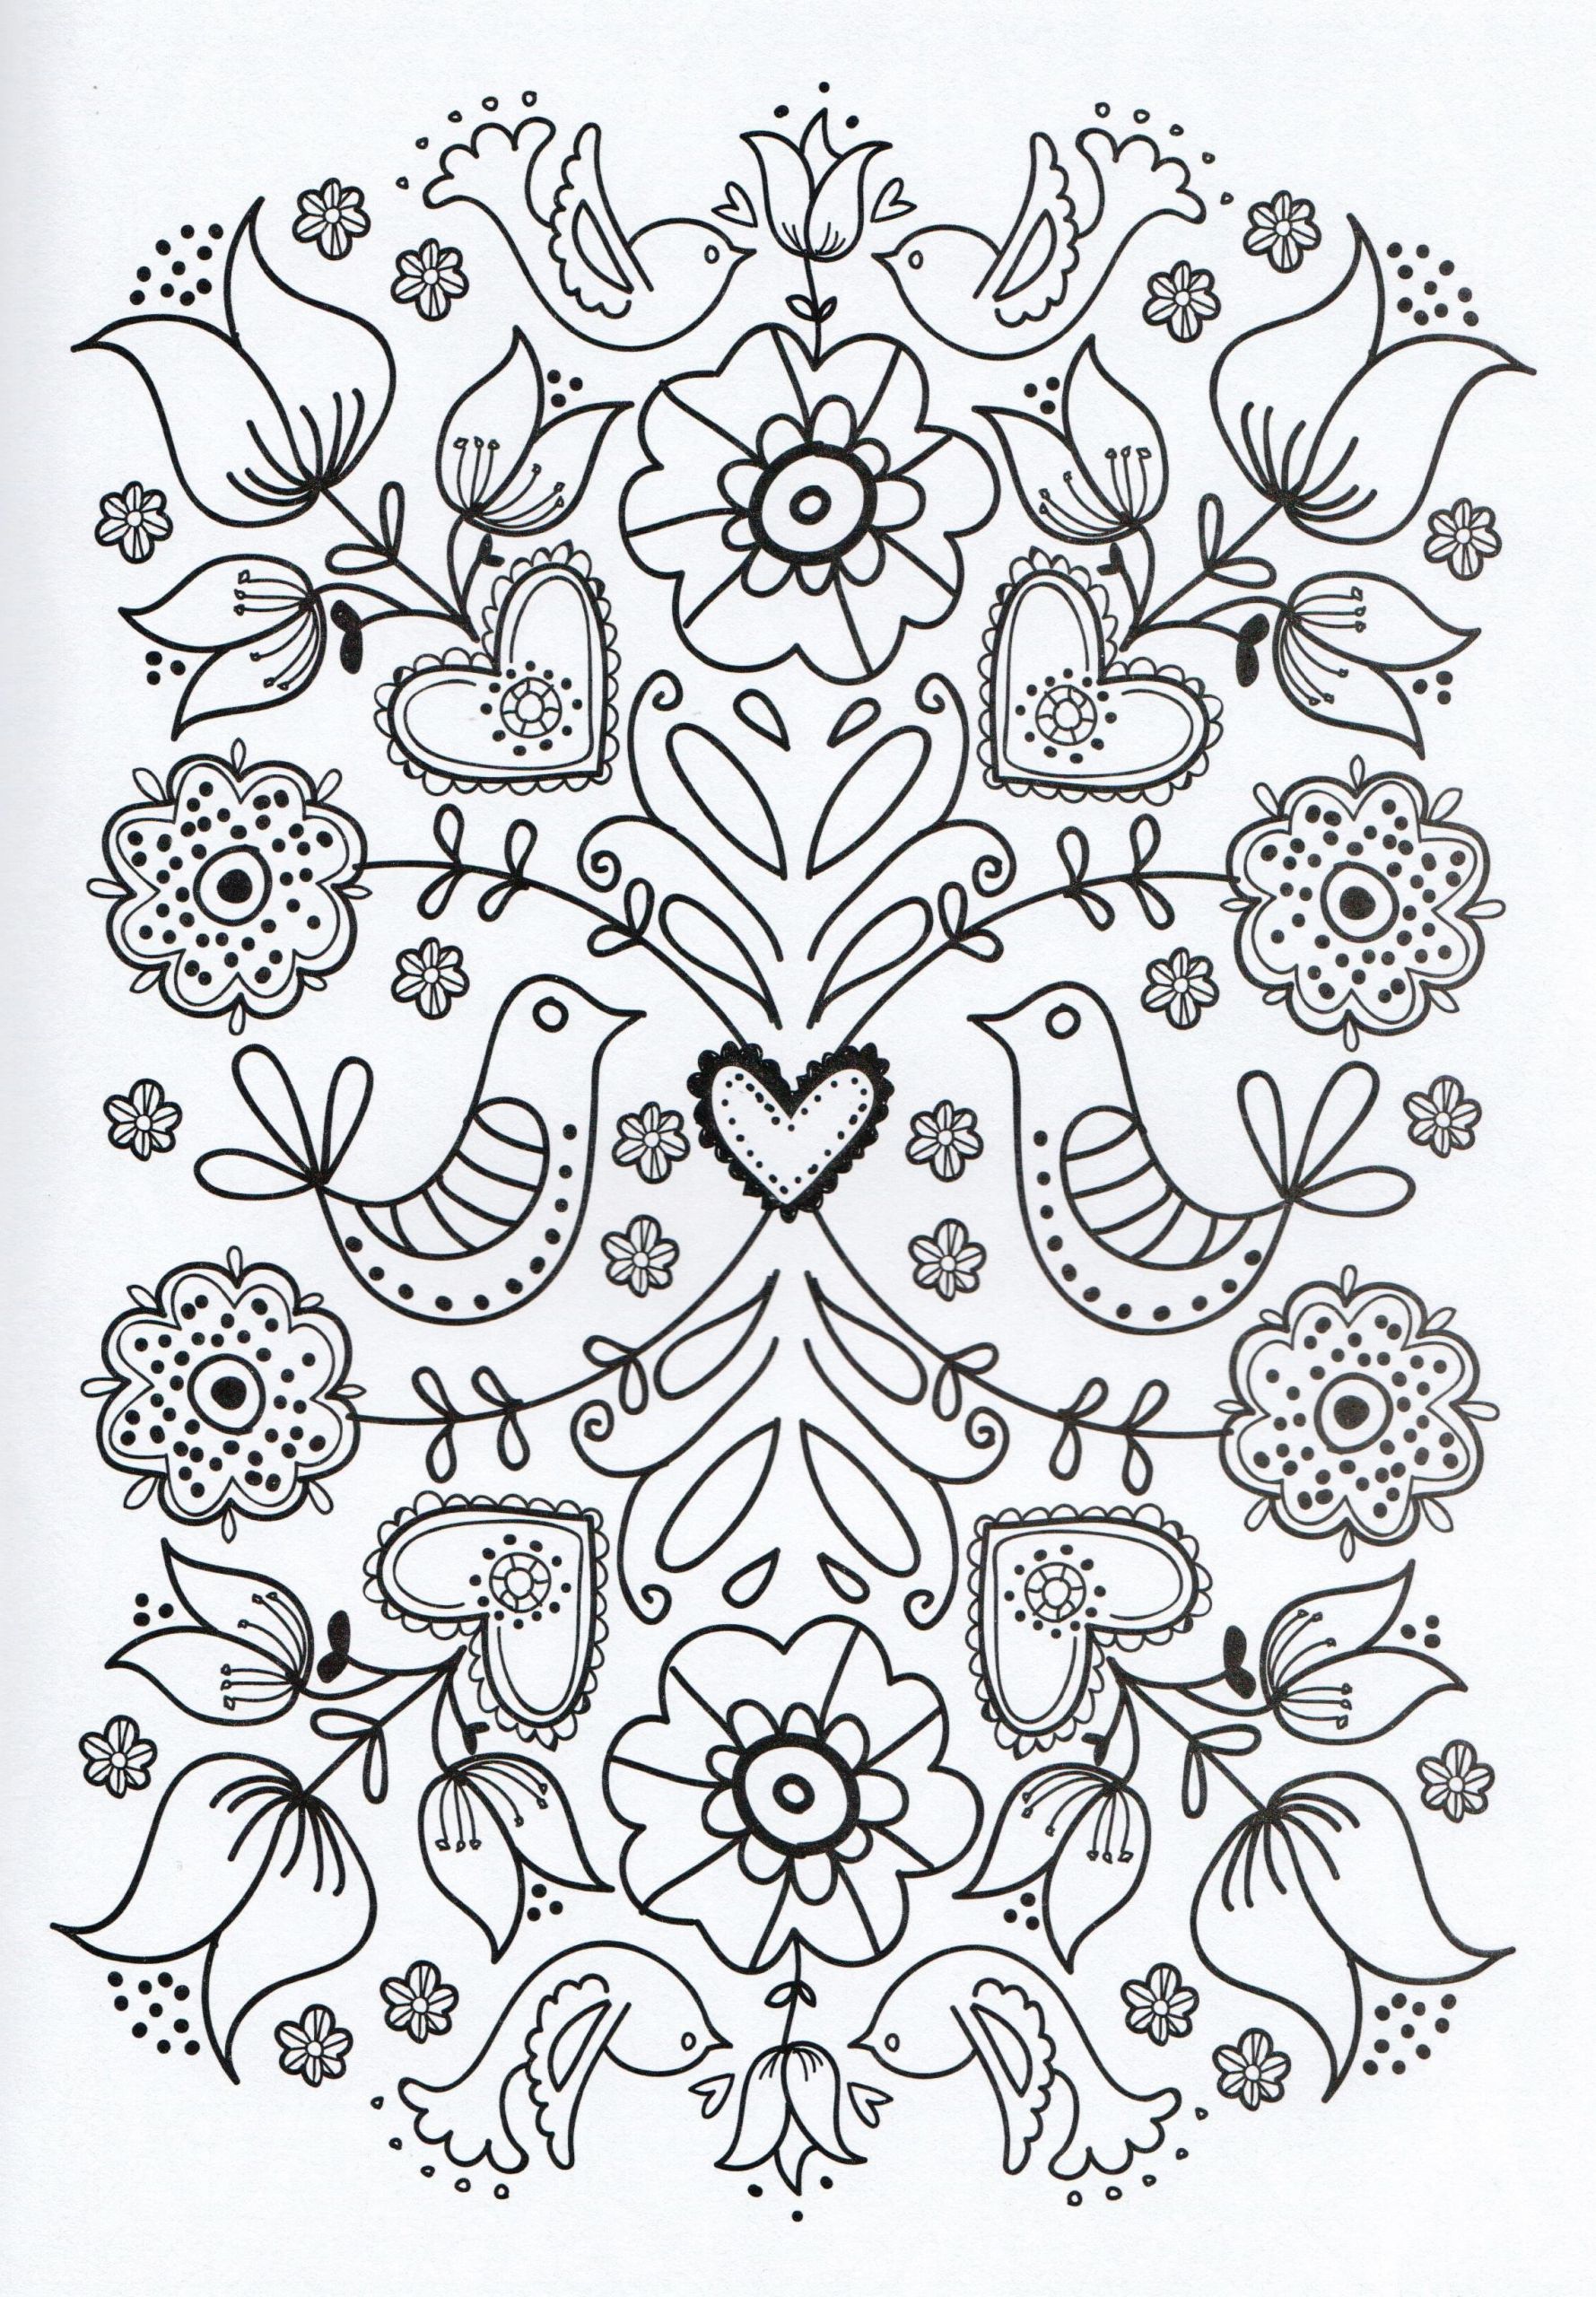 Easy Coloring Pages For Adults
 10 Simple & Useful Mother’s Day Gifts to DIY or Buy